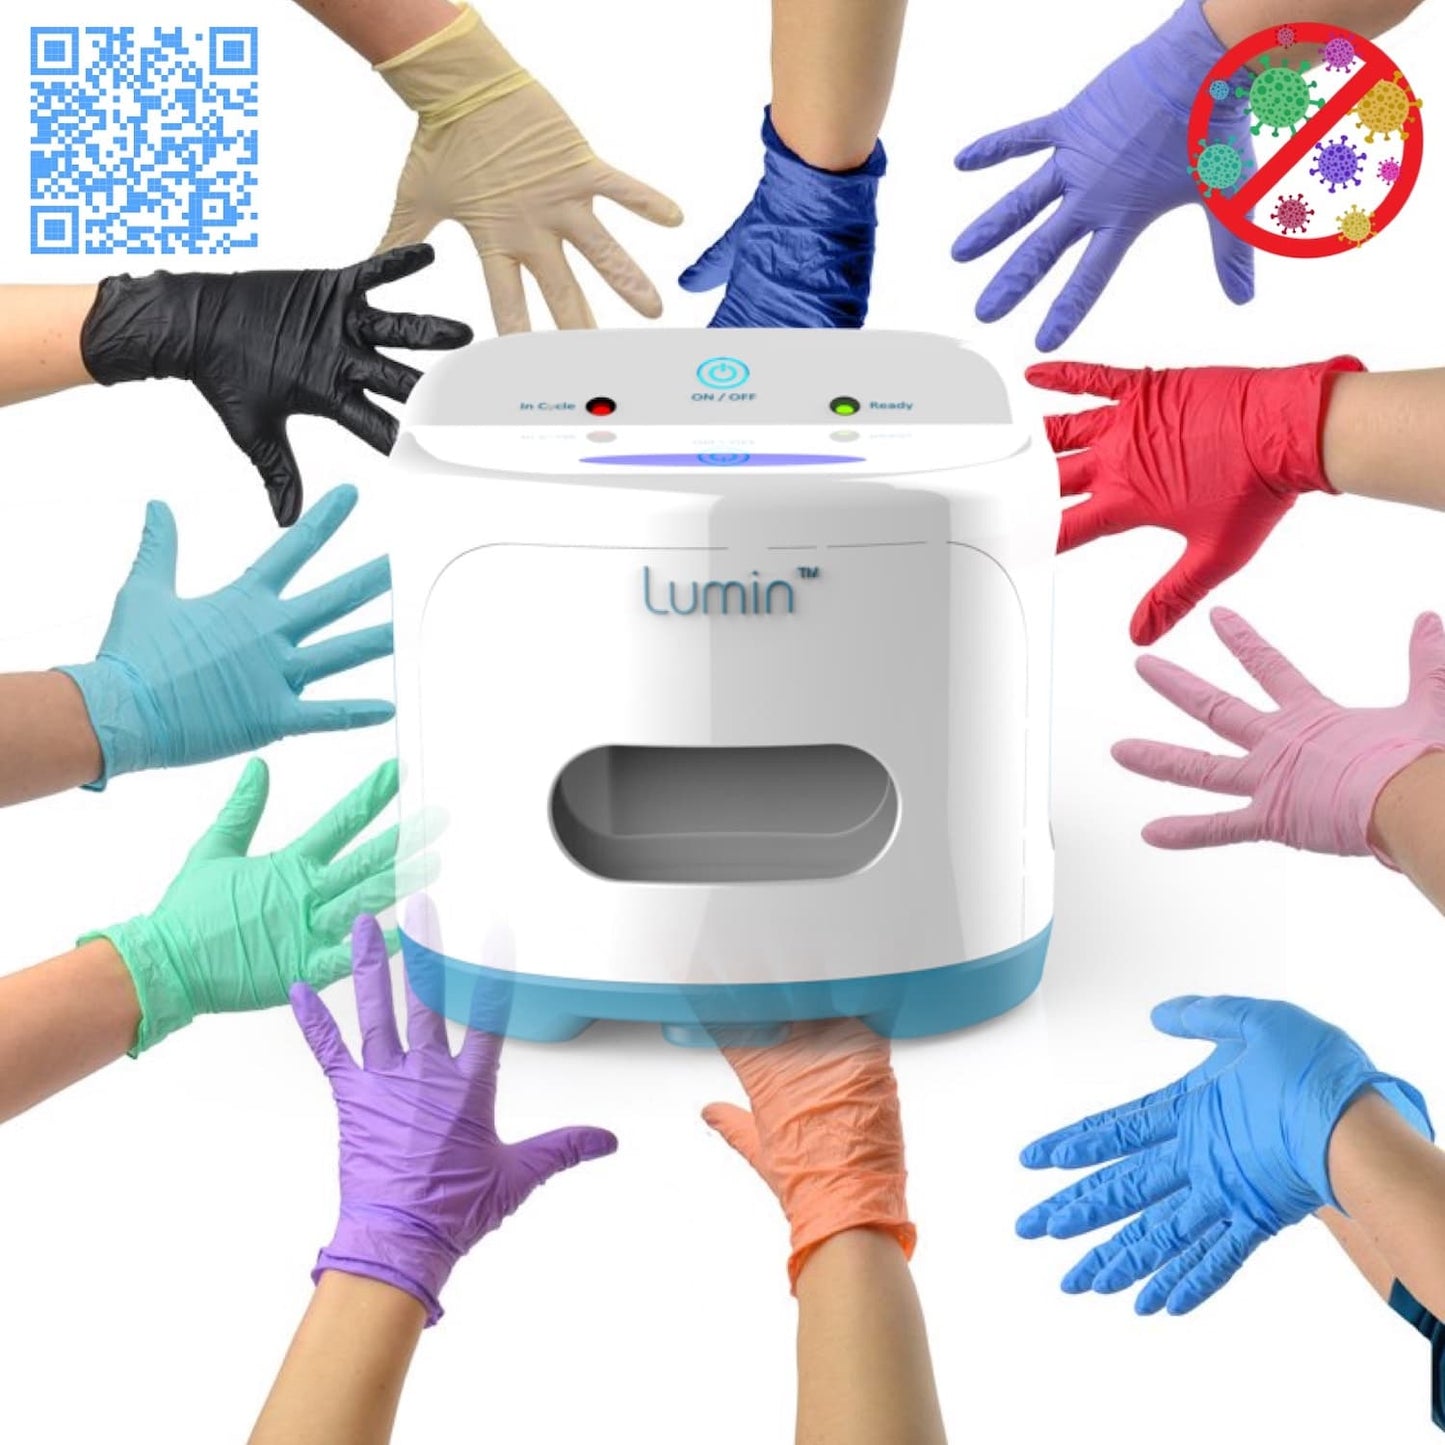 Lumin UVC - Sanitizing System Interface Accessories Cleaner hands in multi colored gloves